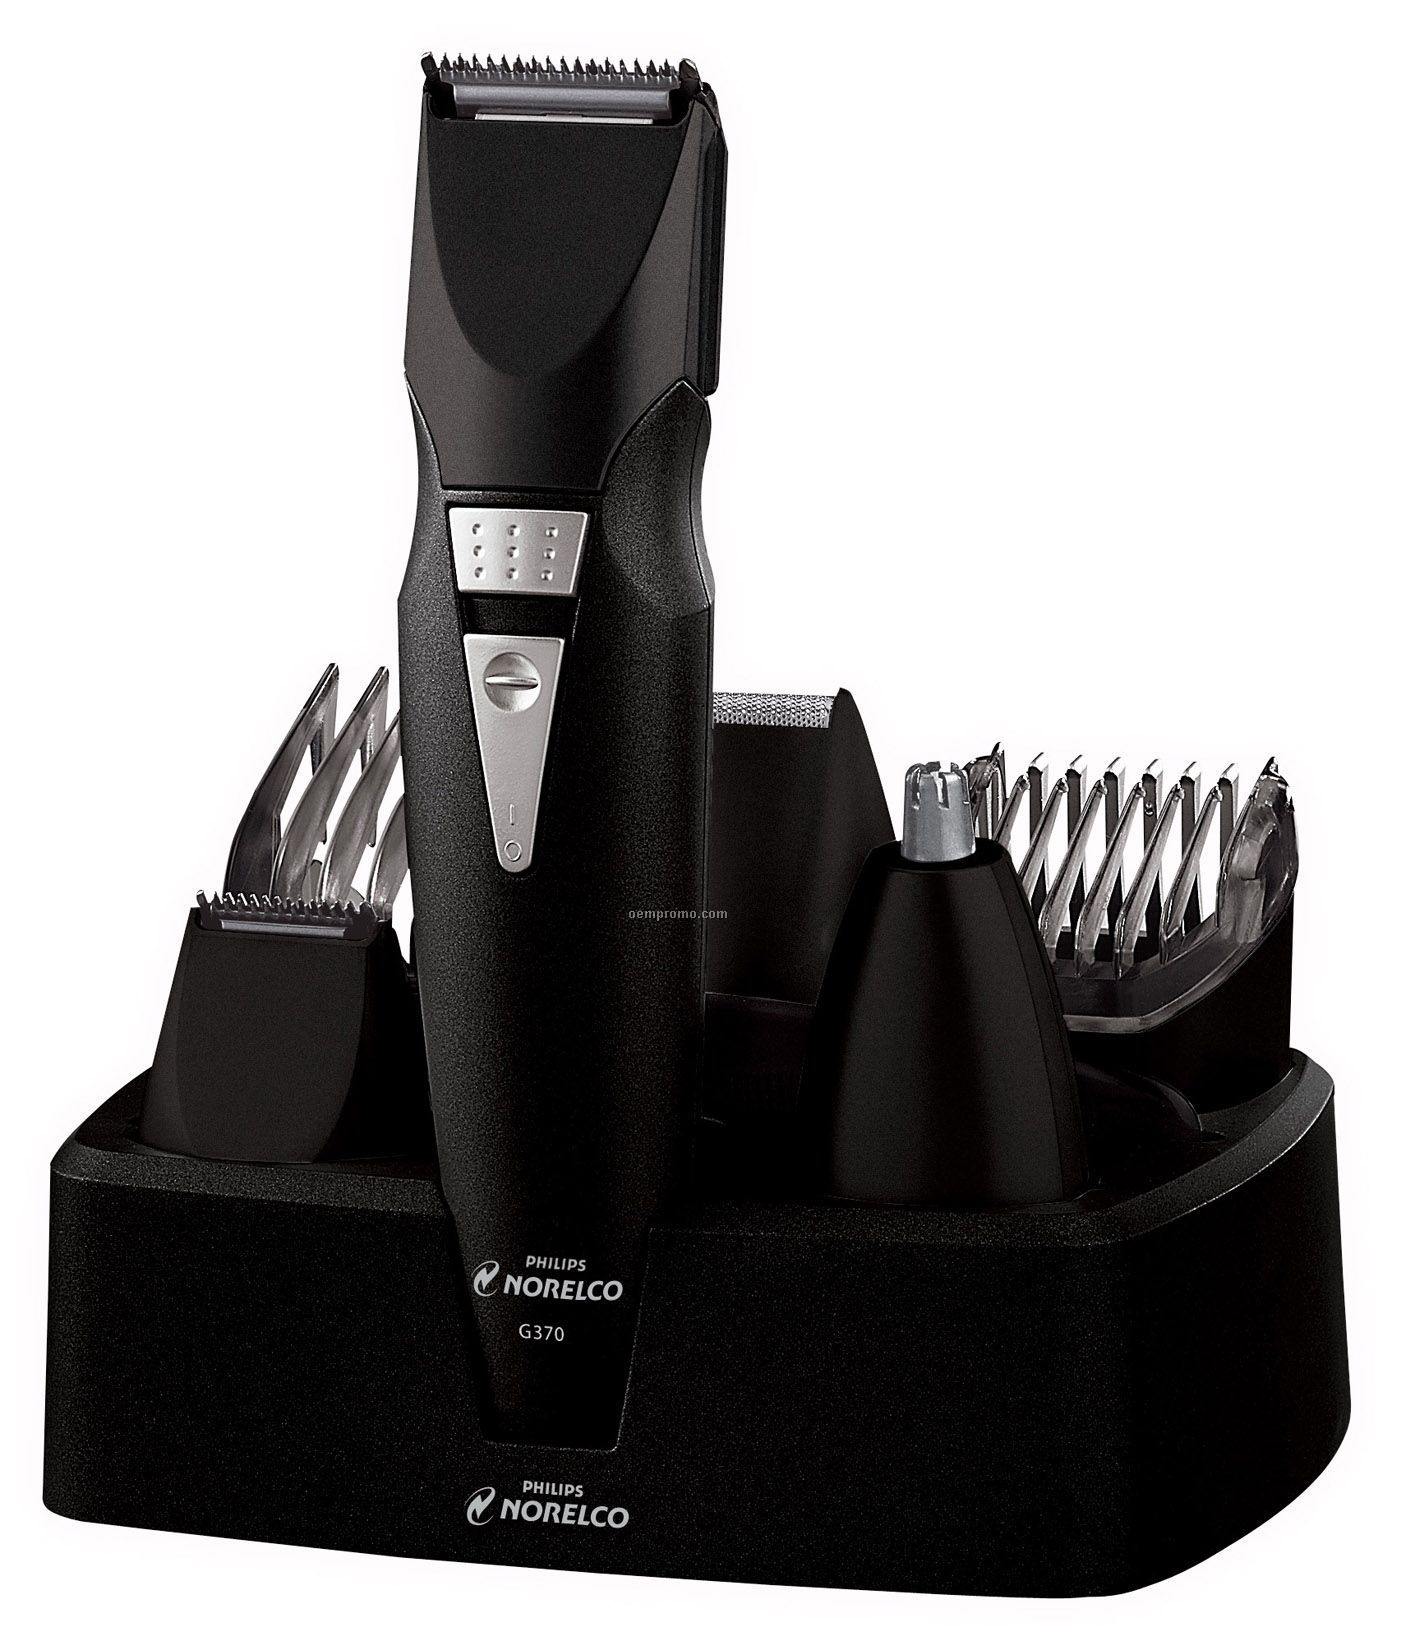 Phillips Norelco Rechargeable Cordless Personal Grooming System